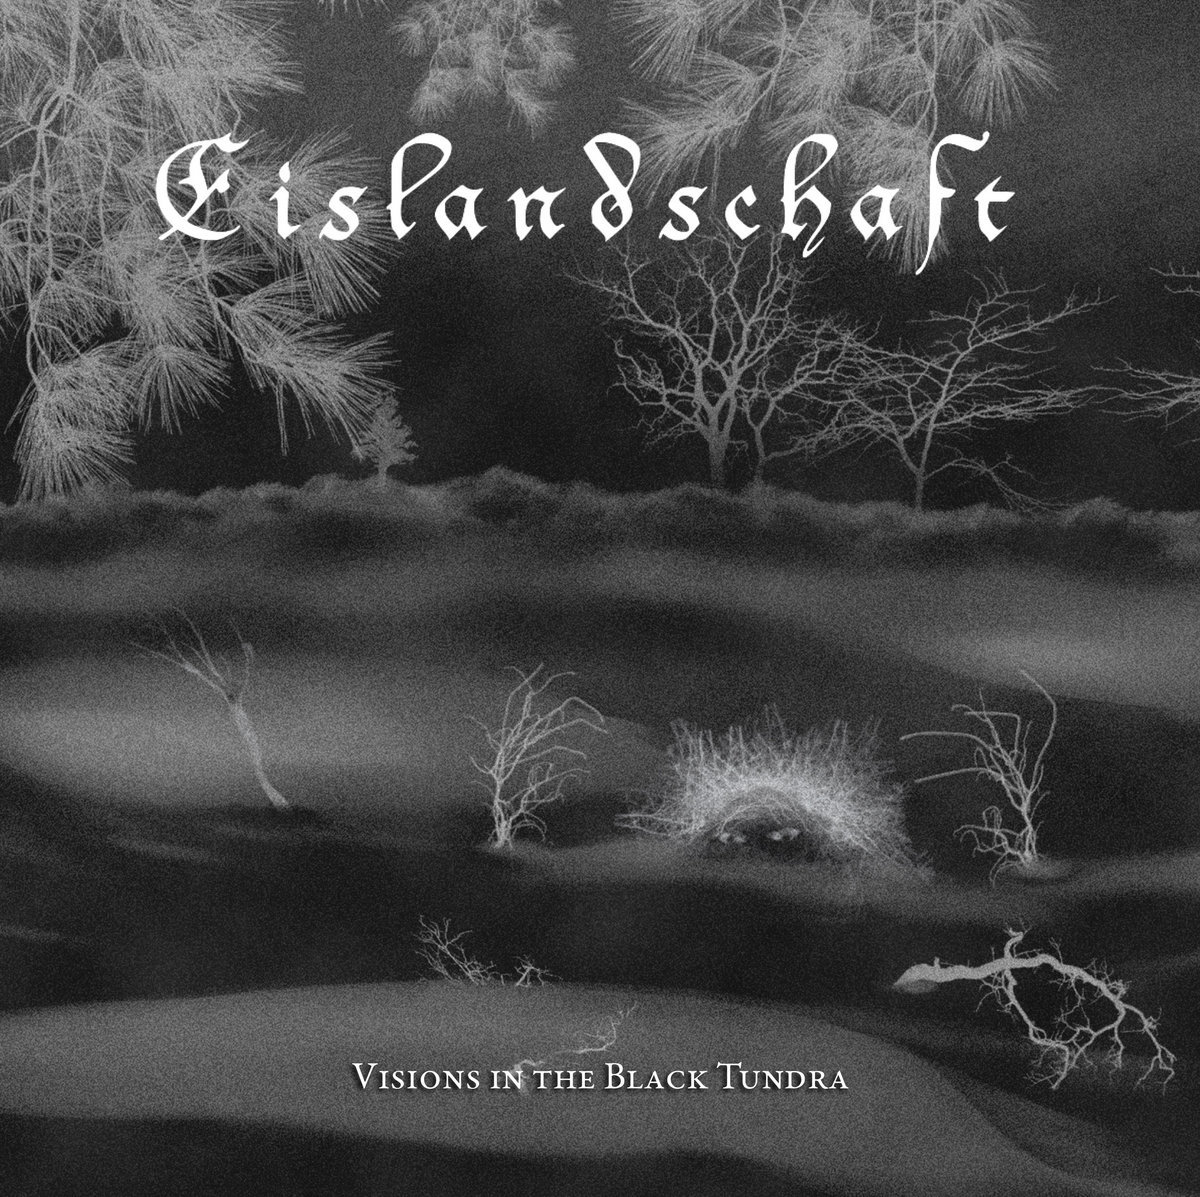 Eislandschaft - Visions in the Black Tundra